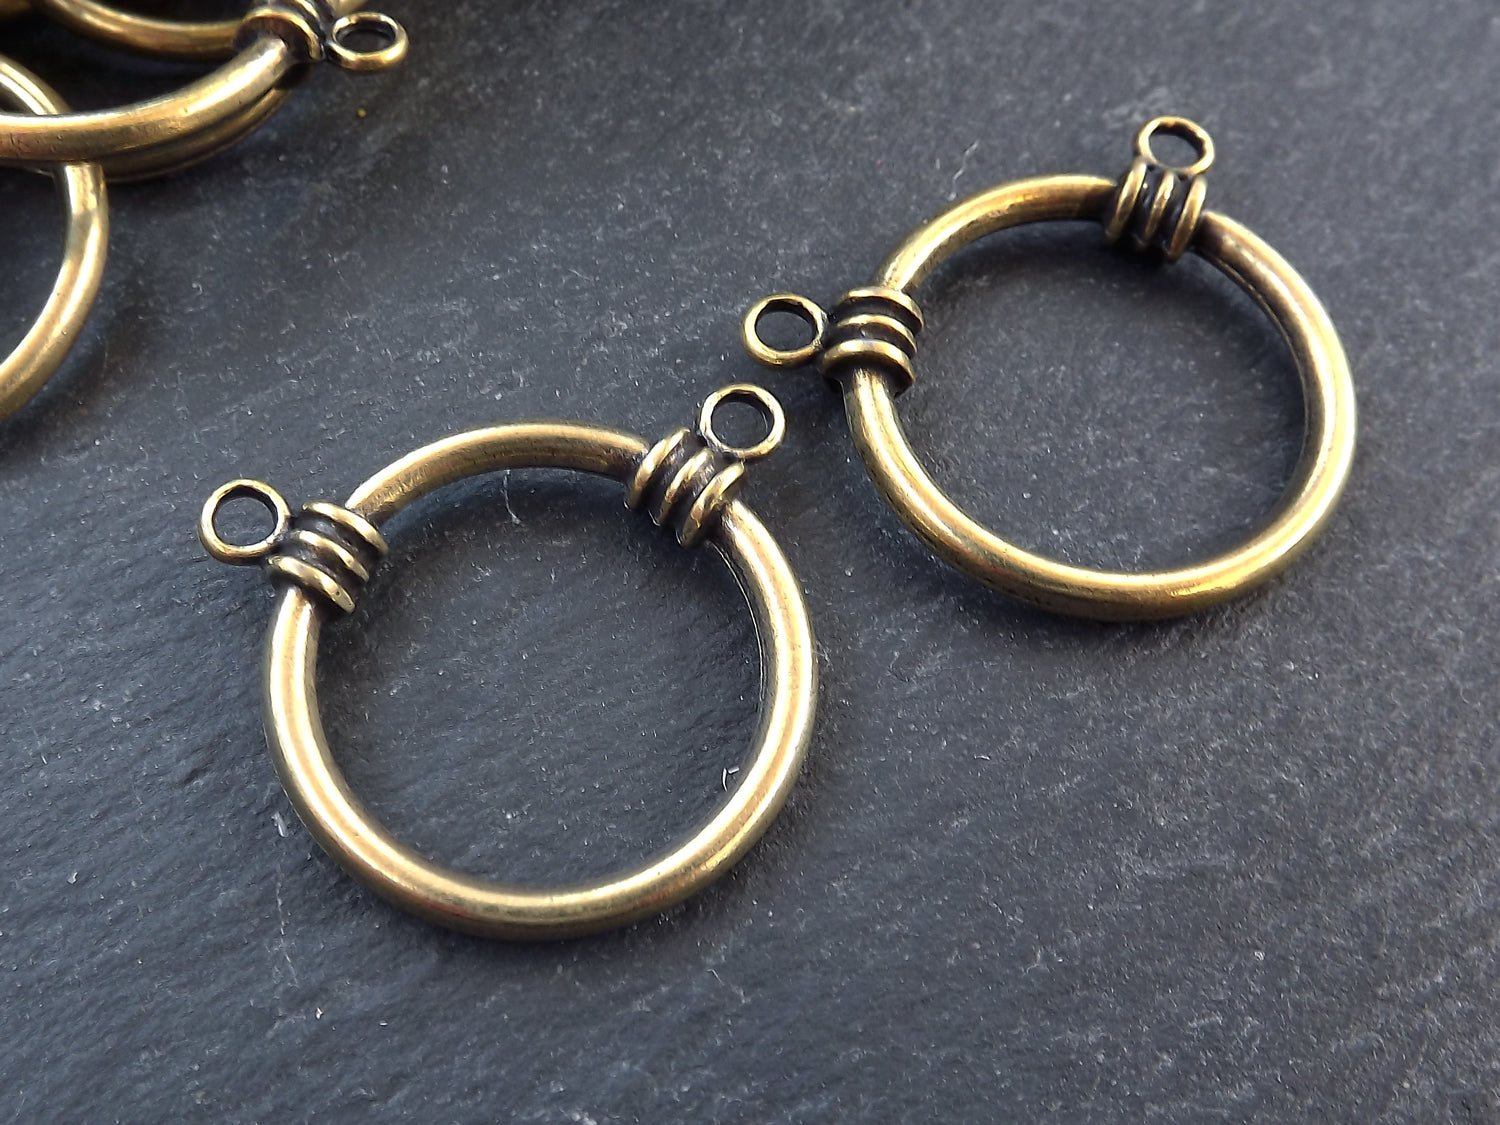 2 Round Ring Closed Loop Pendant Connector with Two Loops - Antique Bronze Plated